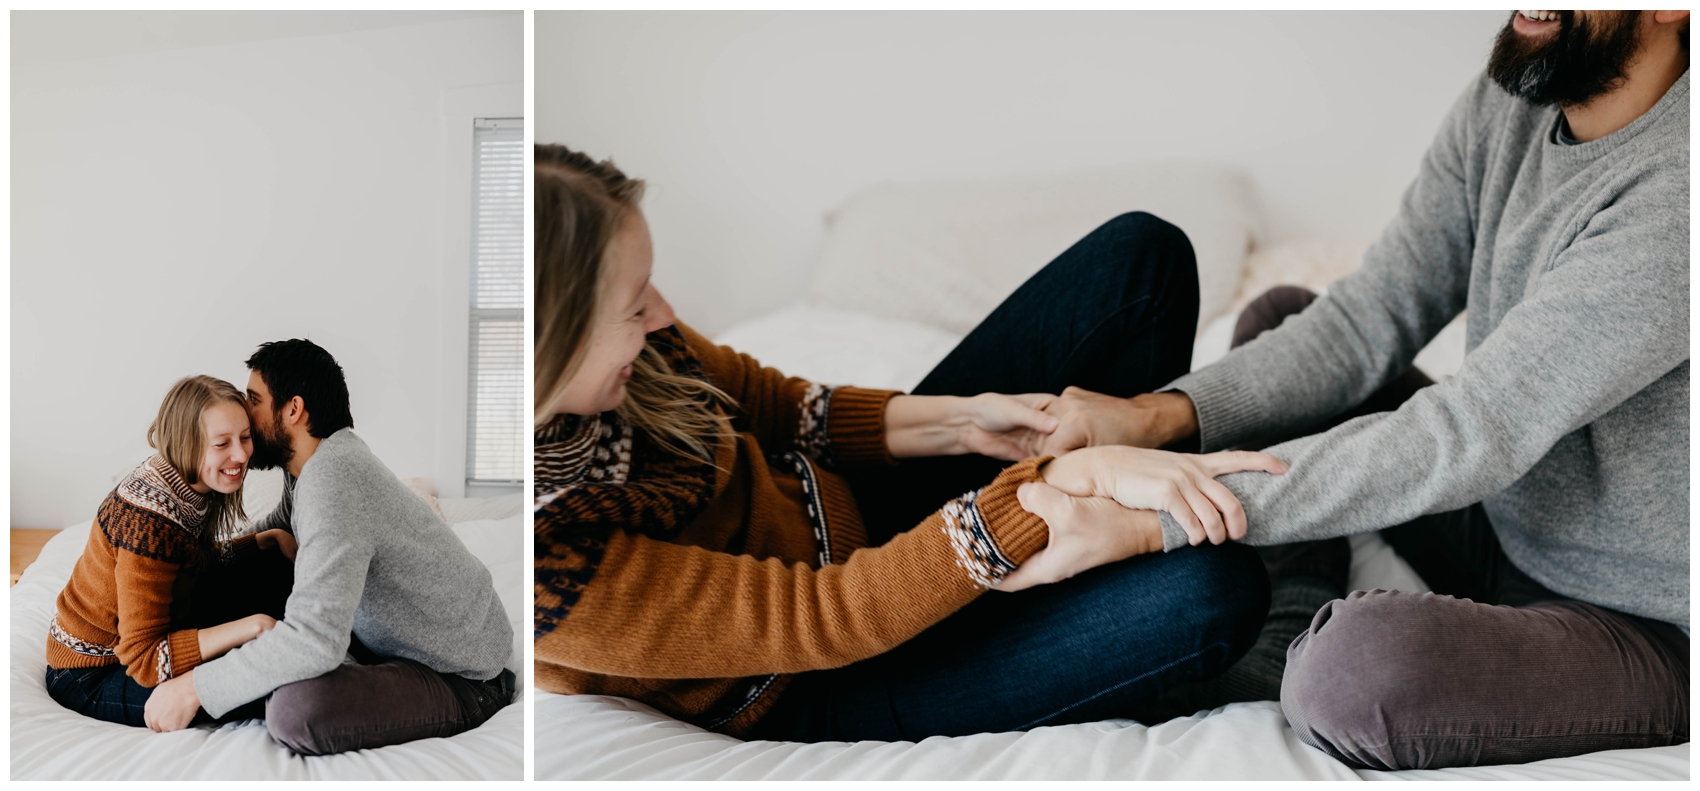 Michigan Couples Session. Couple on bed